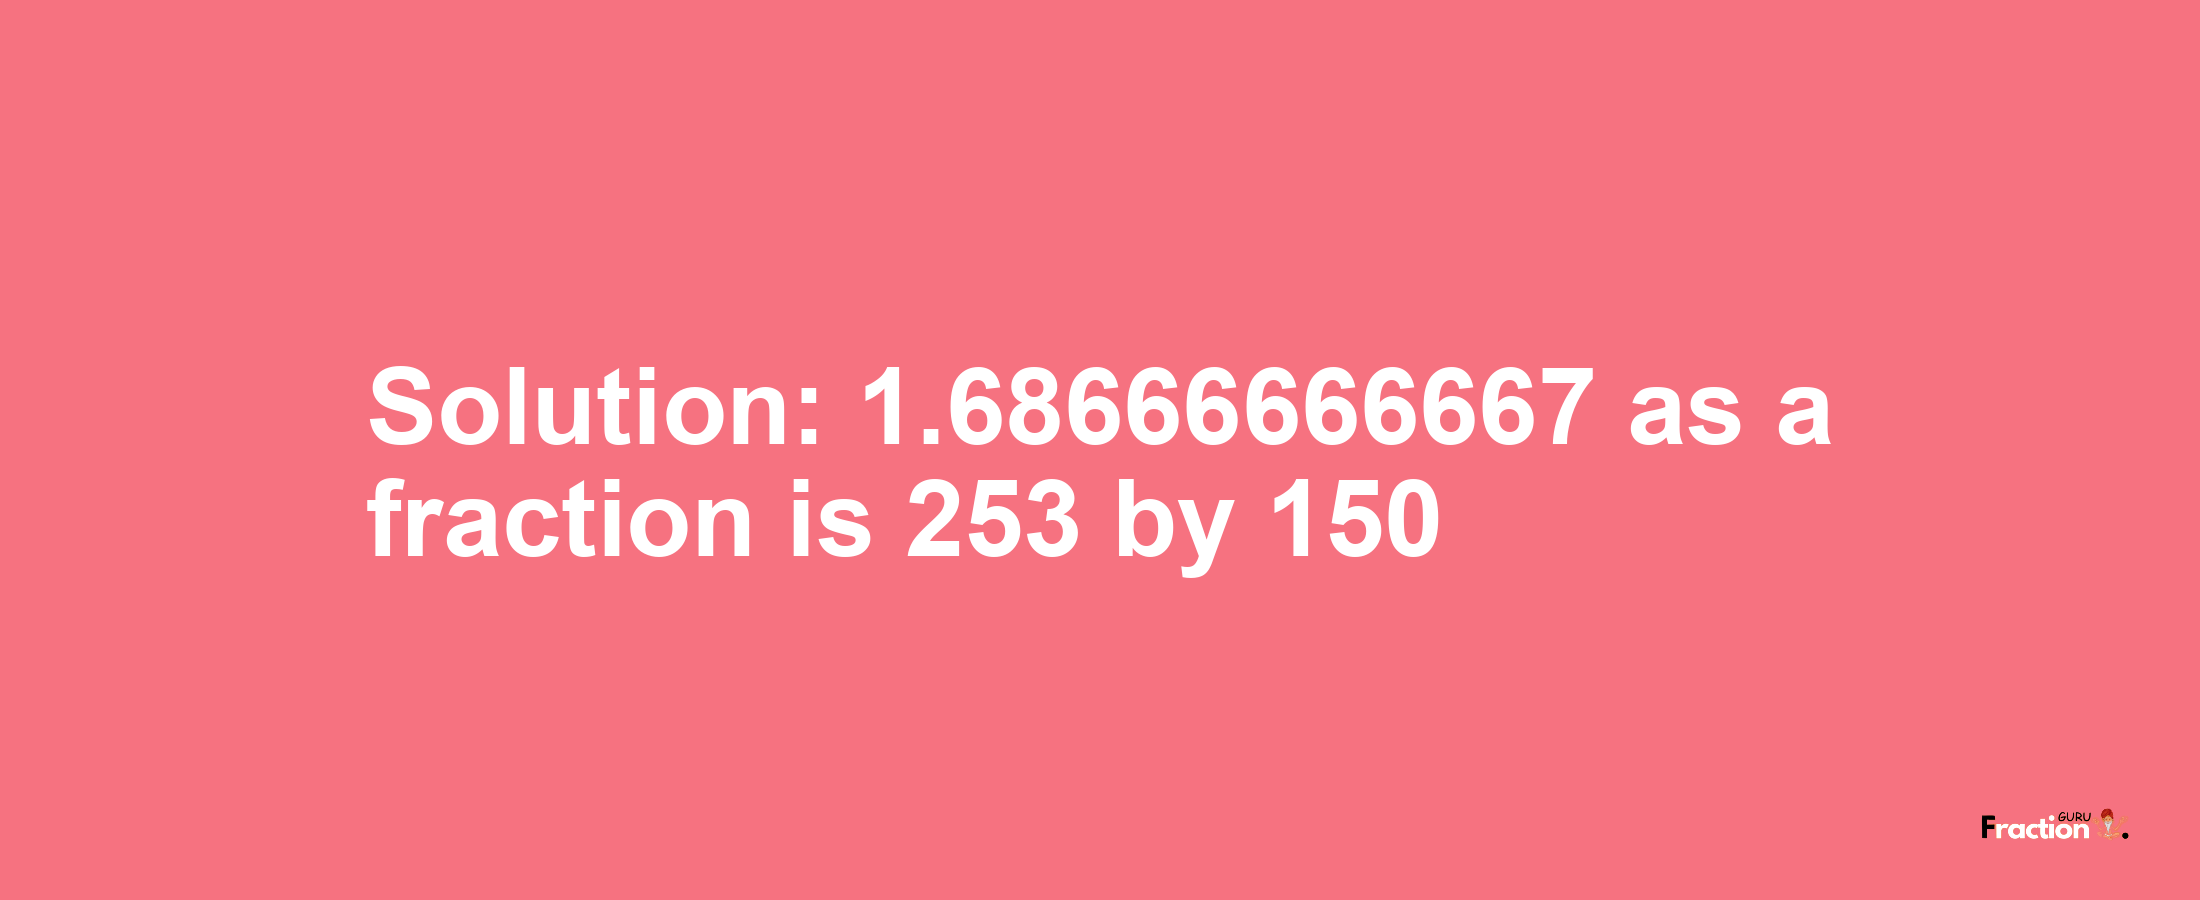 Solution:1.68666666667 as a fraction is 253/150